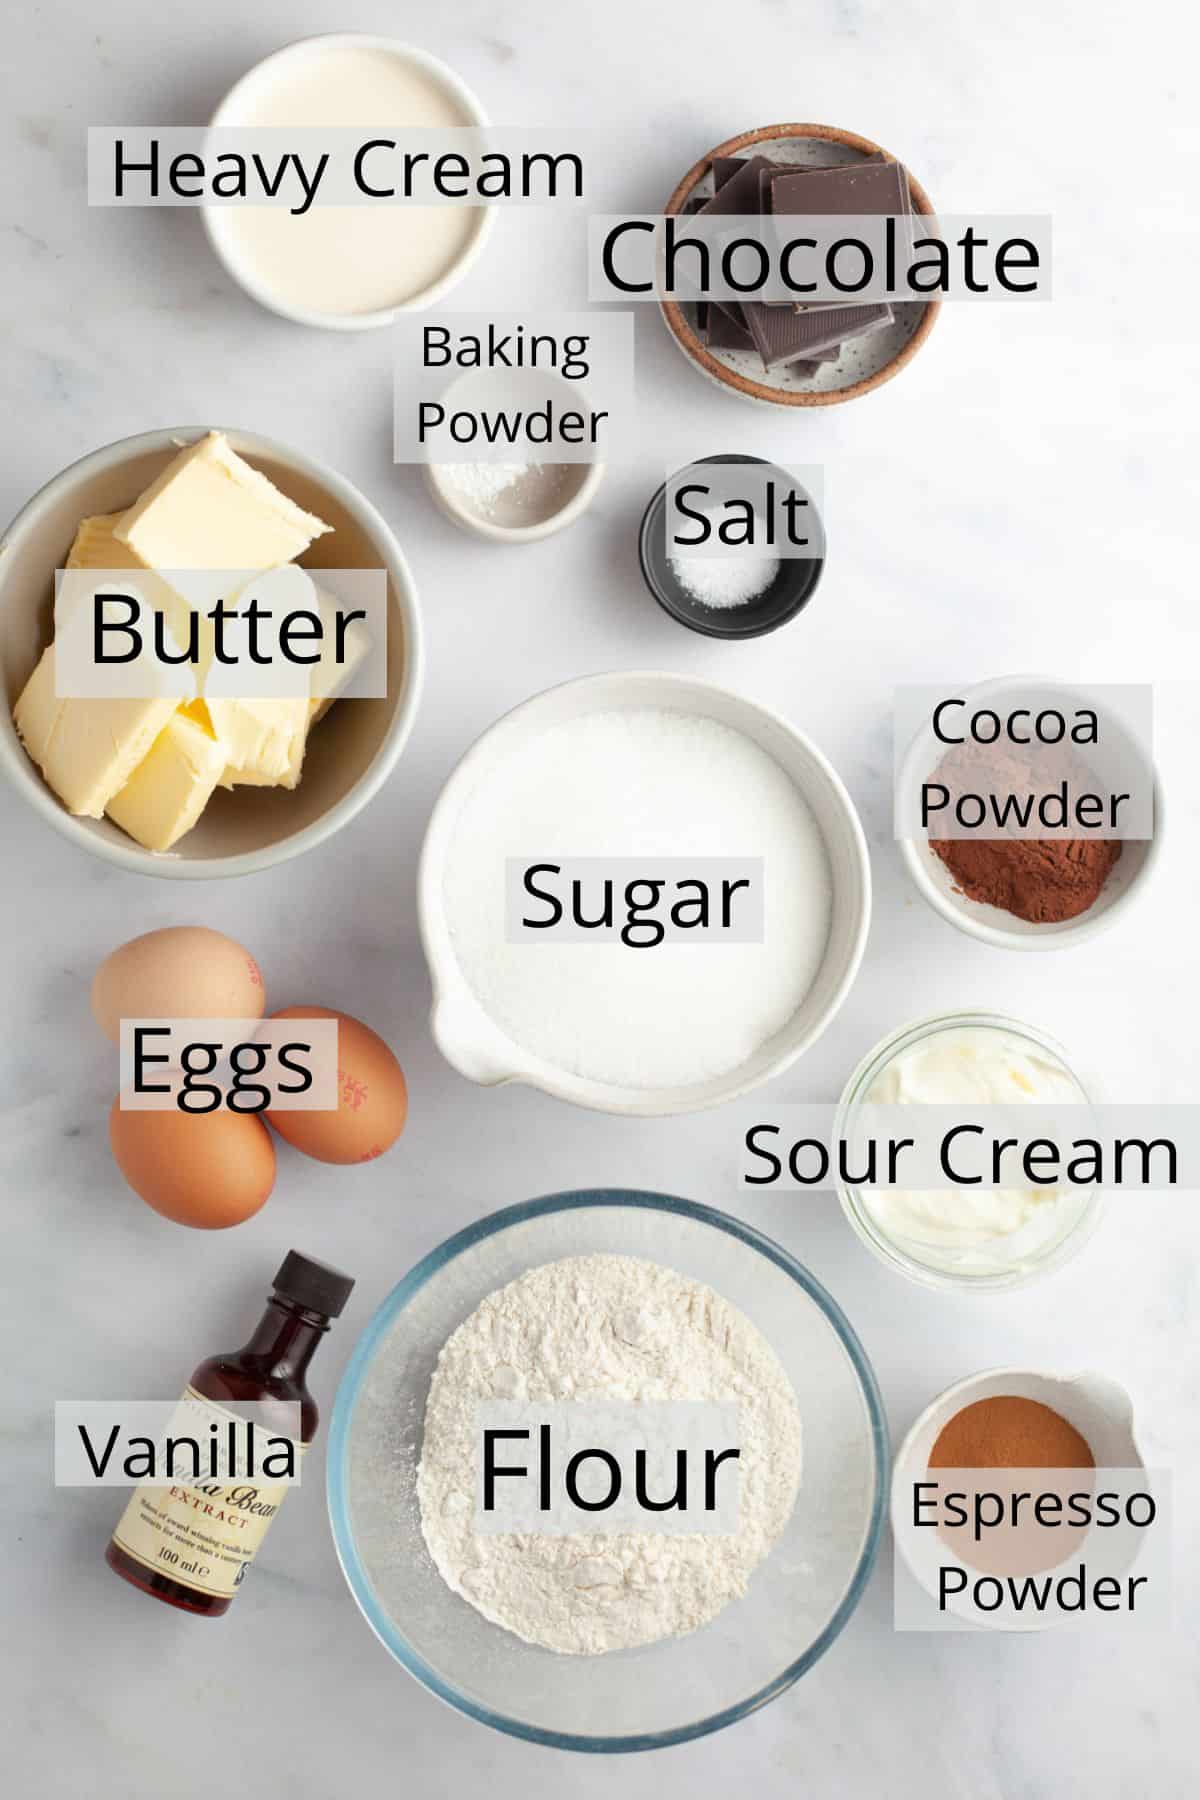 All the ingredients needed to make marble loaf cake weighed out into small bowls.